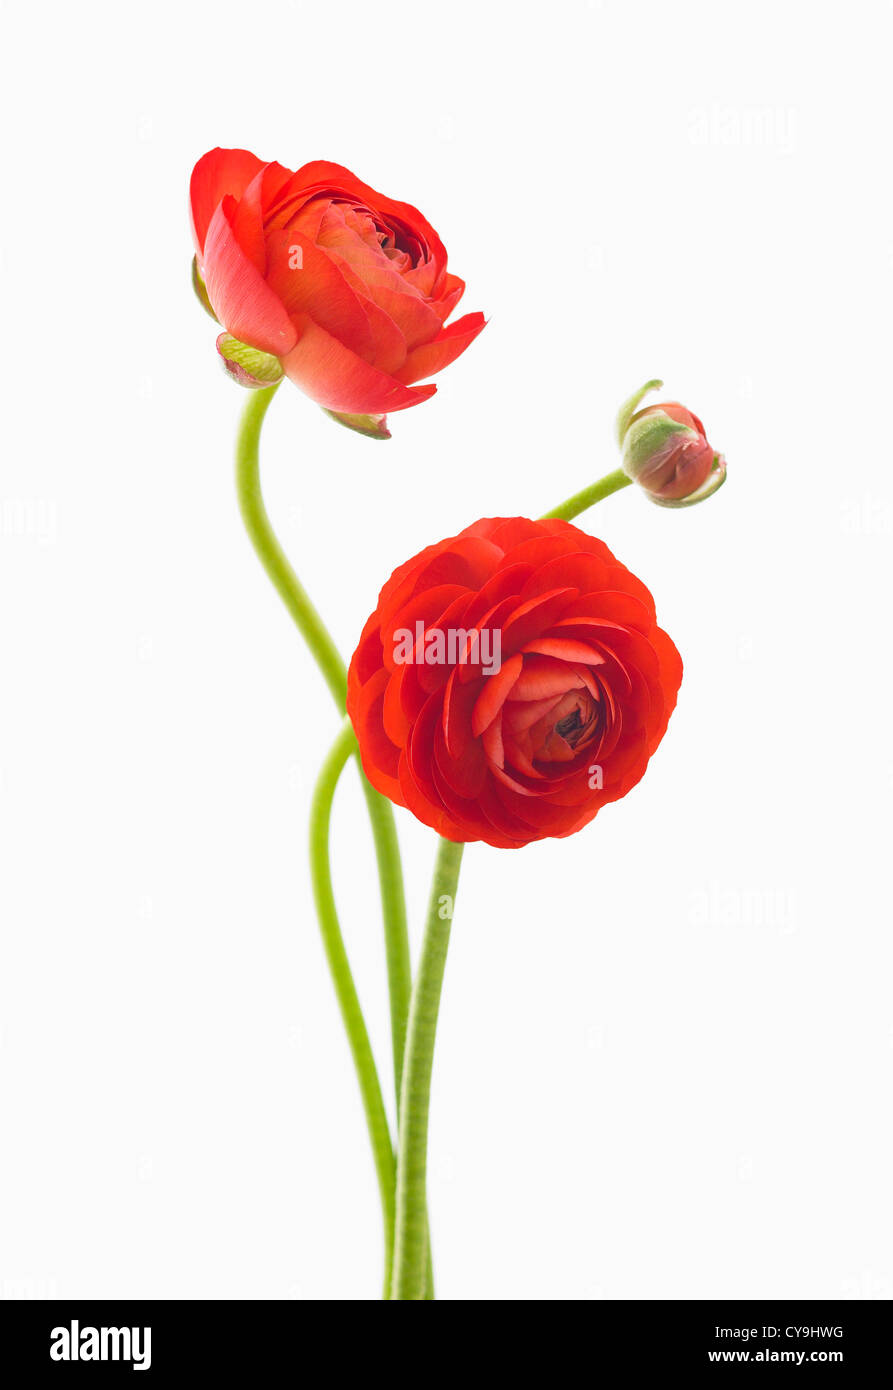 Ranunculus asiaticus 'Elegance Red', Red Persian ranunculus against a white background. Stock Photo